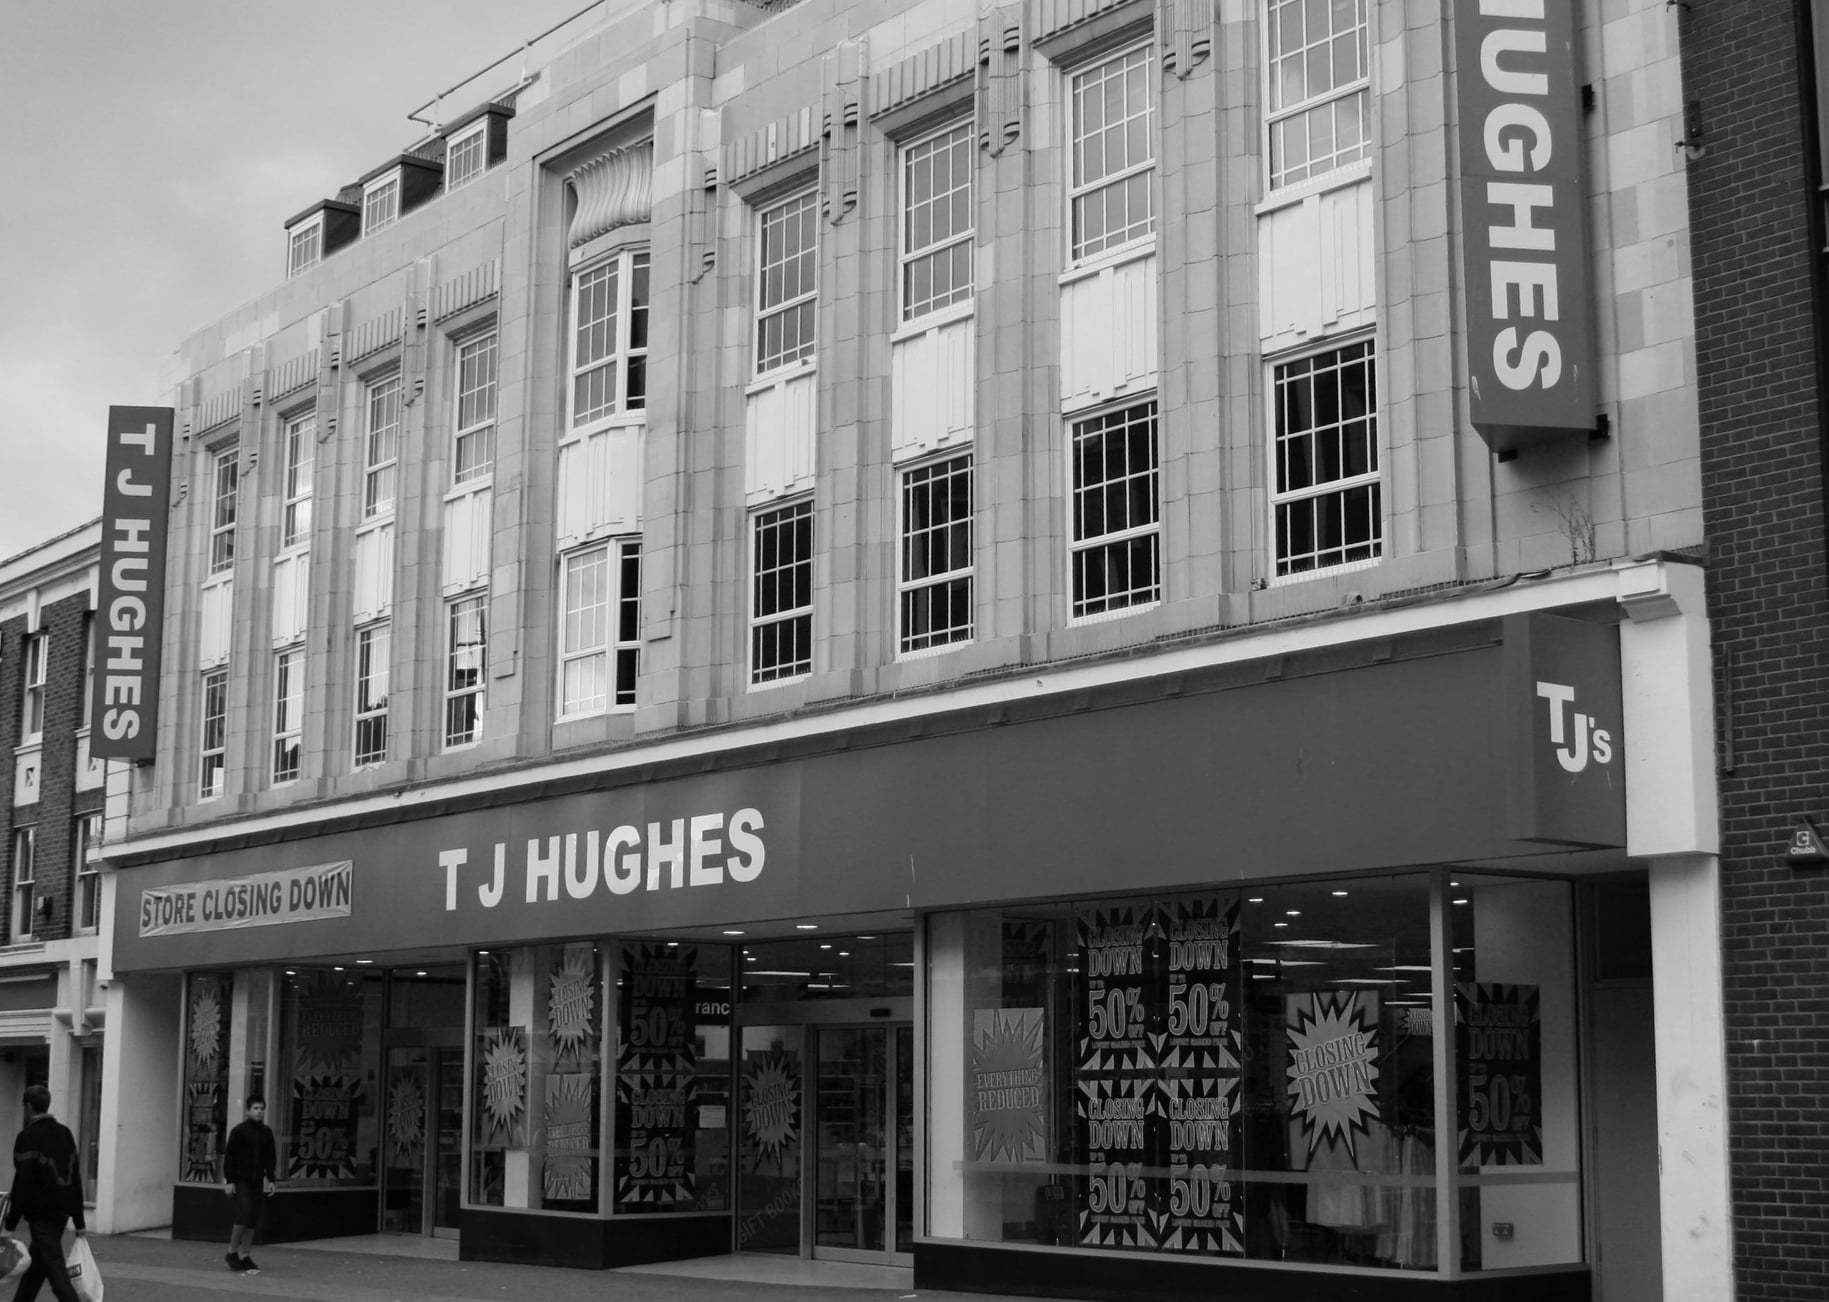 Closing down sale - T J Hughes was on Southend High Street 10 years ago but soon shut its doors